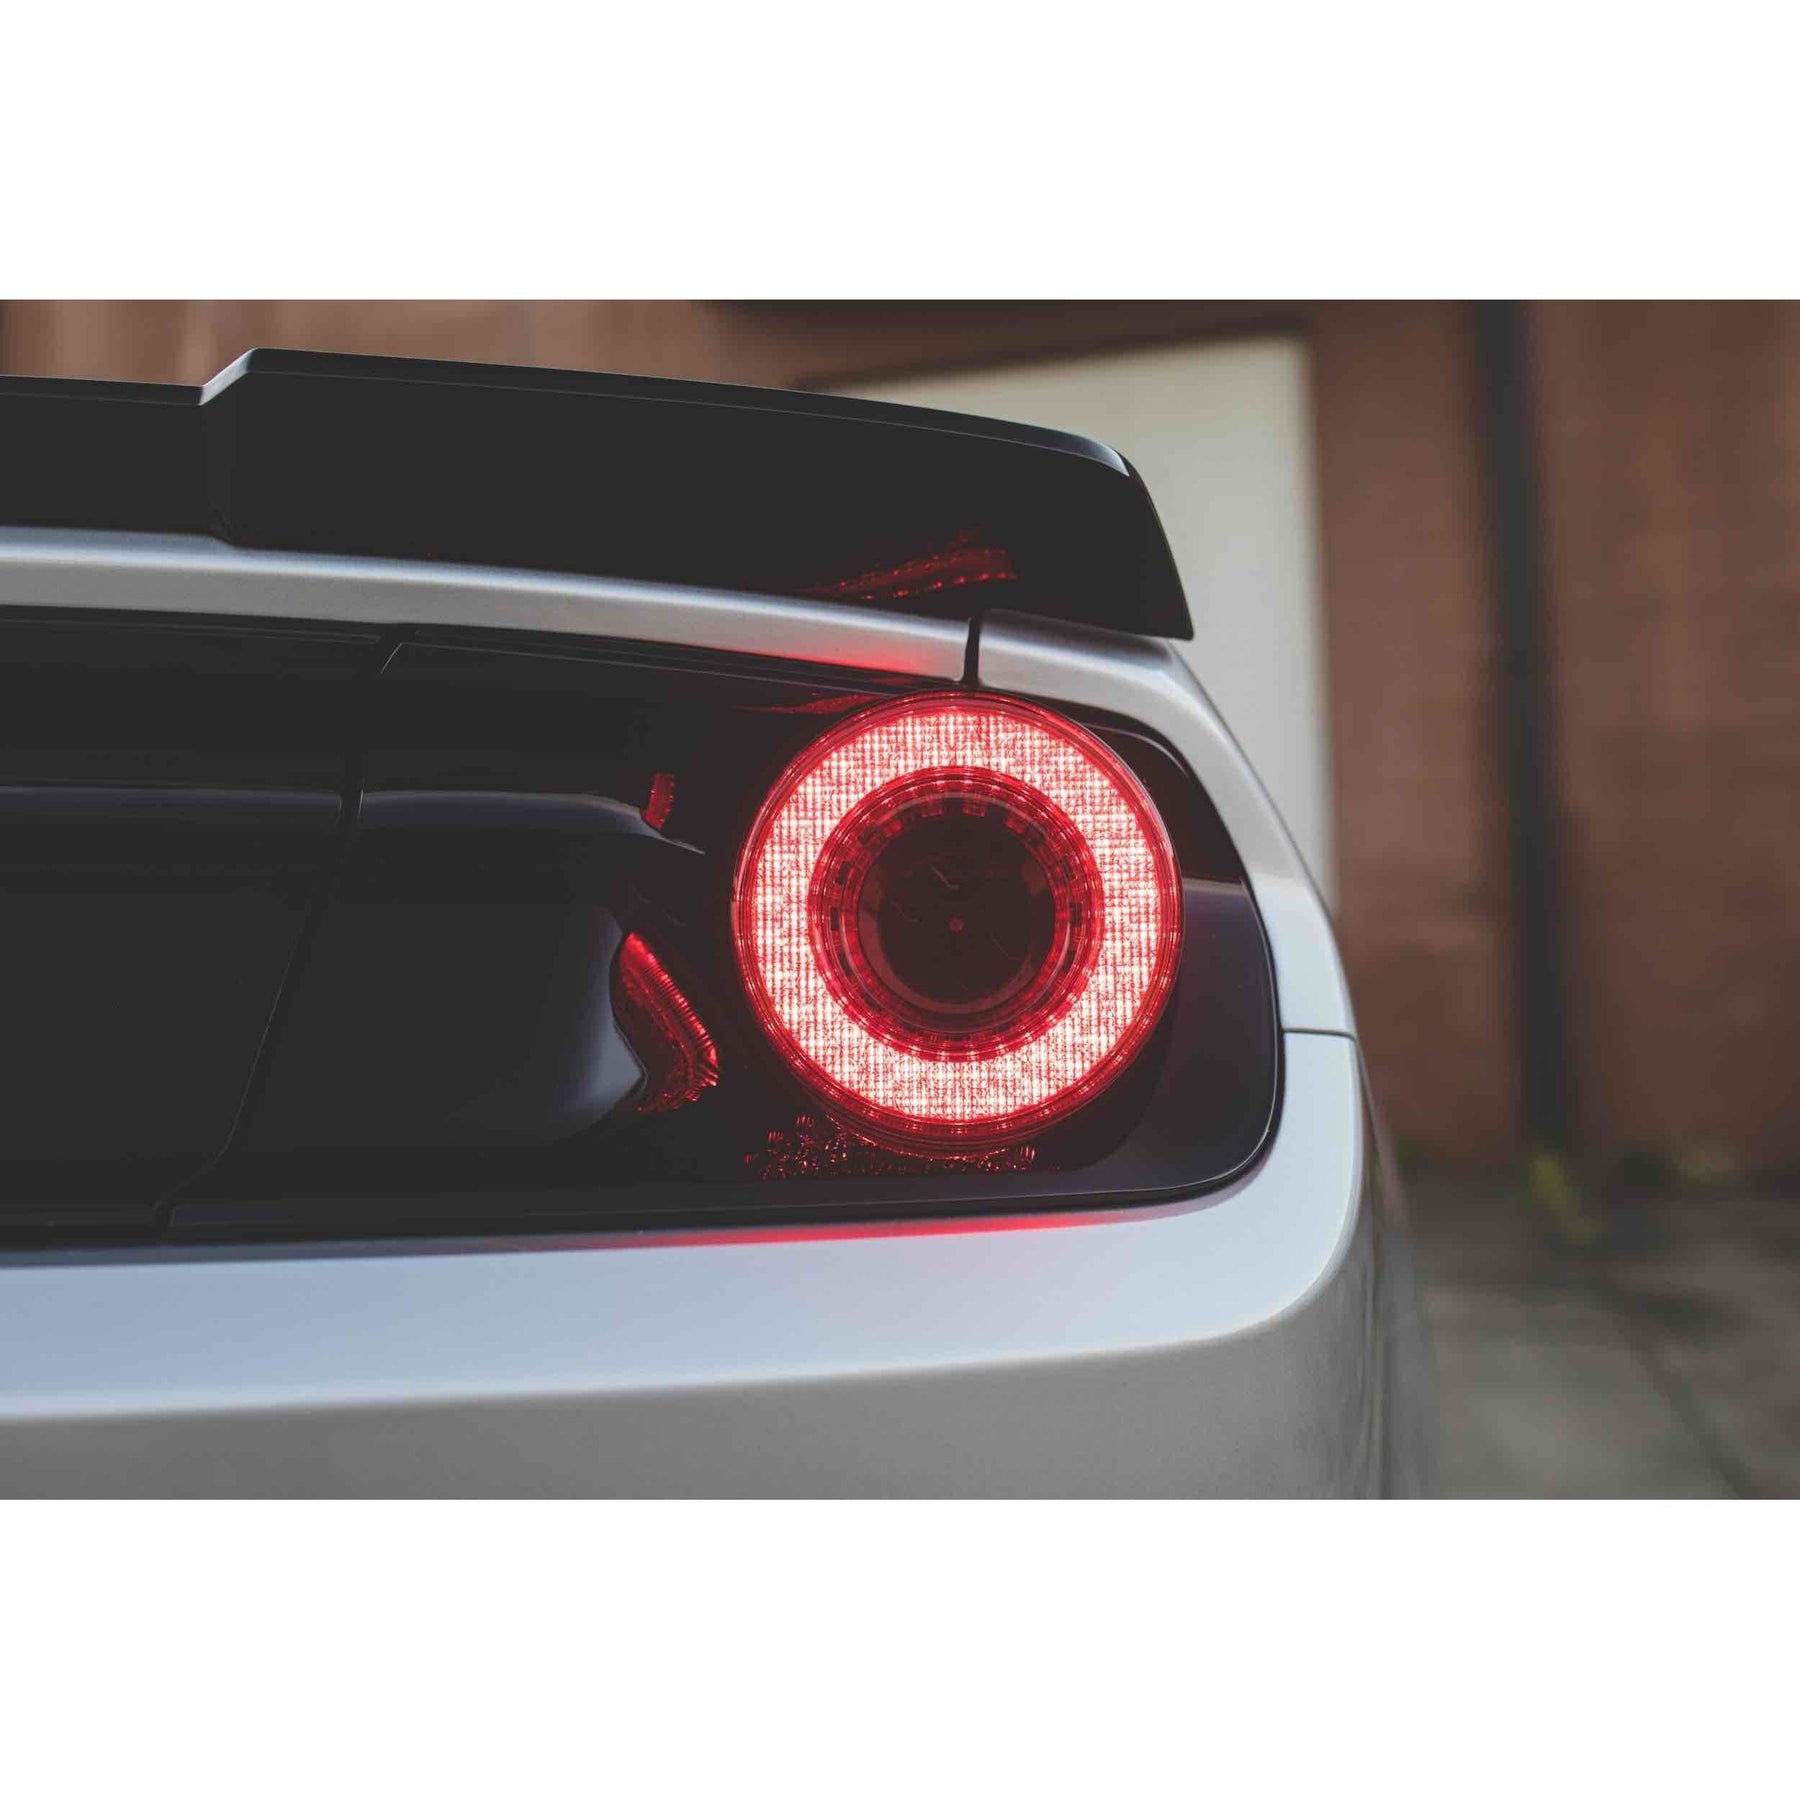 *Discontinued* 2015+ Ford Mustang XB LED Red Tail Lights (LF412)-Tail Lights-Morimoto-LF412-Dirty Diesel Customs